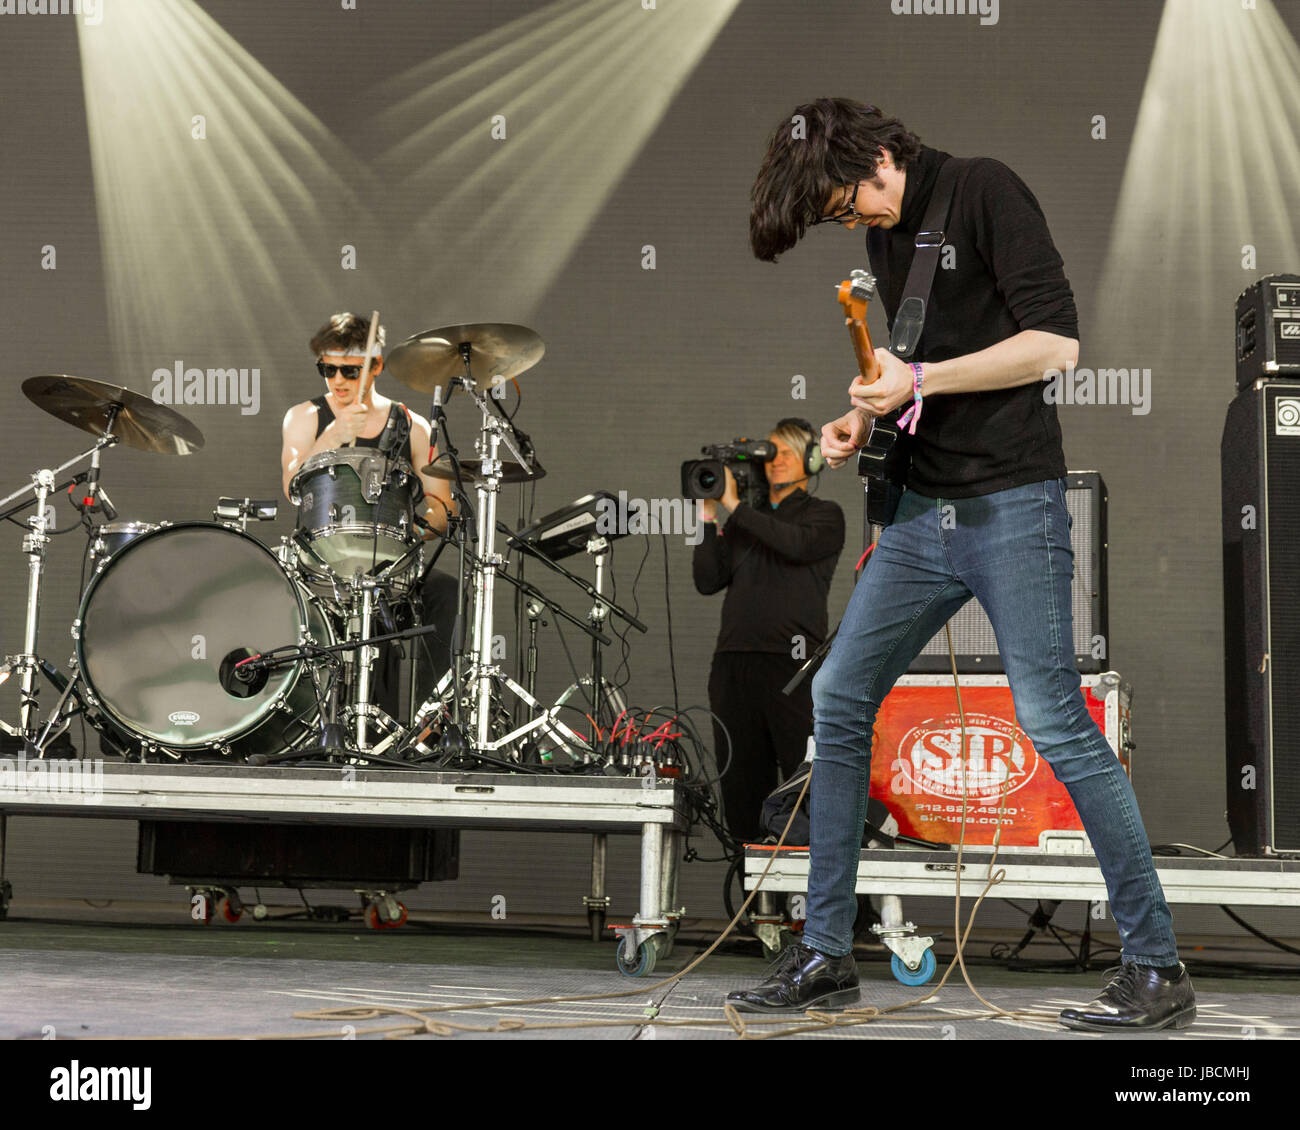 Manchester, Tennessee, USA. 9th June, 2017. ANDREW KATZ and WILL TOLEDO of Car Seat Headrest during Bonnaroo Music and Arts Festival at Great Stage Park in Manchester, Tennessee Credit: Daniel DeSlover/ZUMA Wire/Alamy Live News Stock Photo